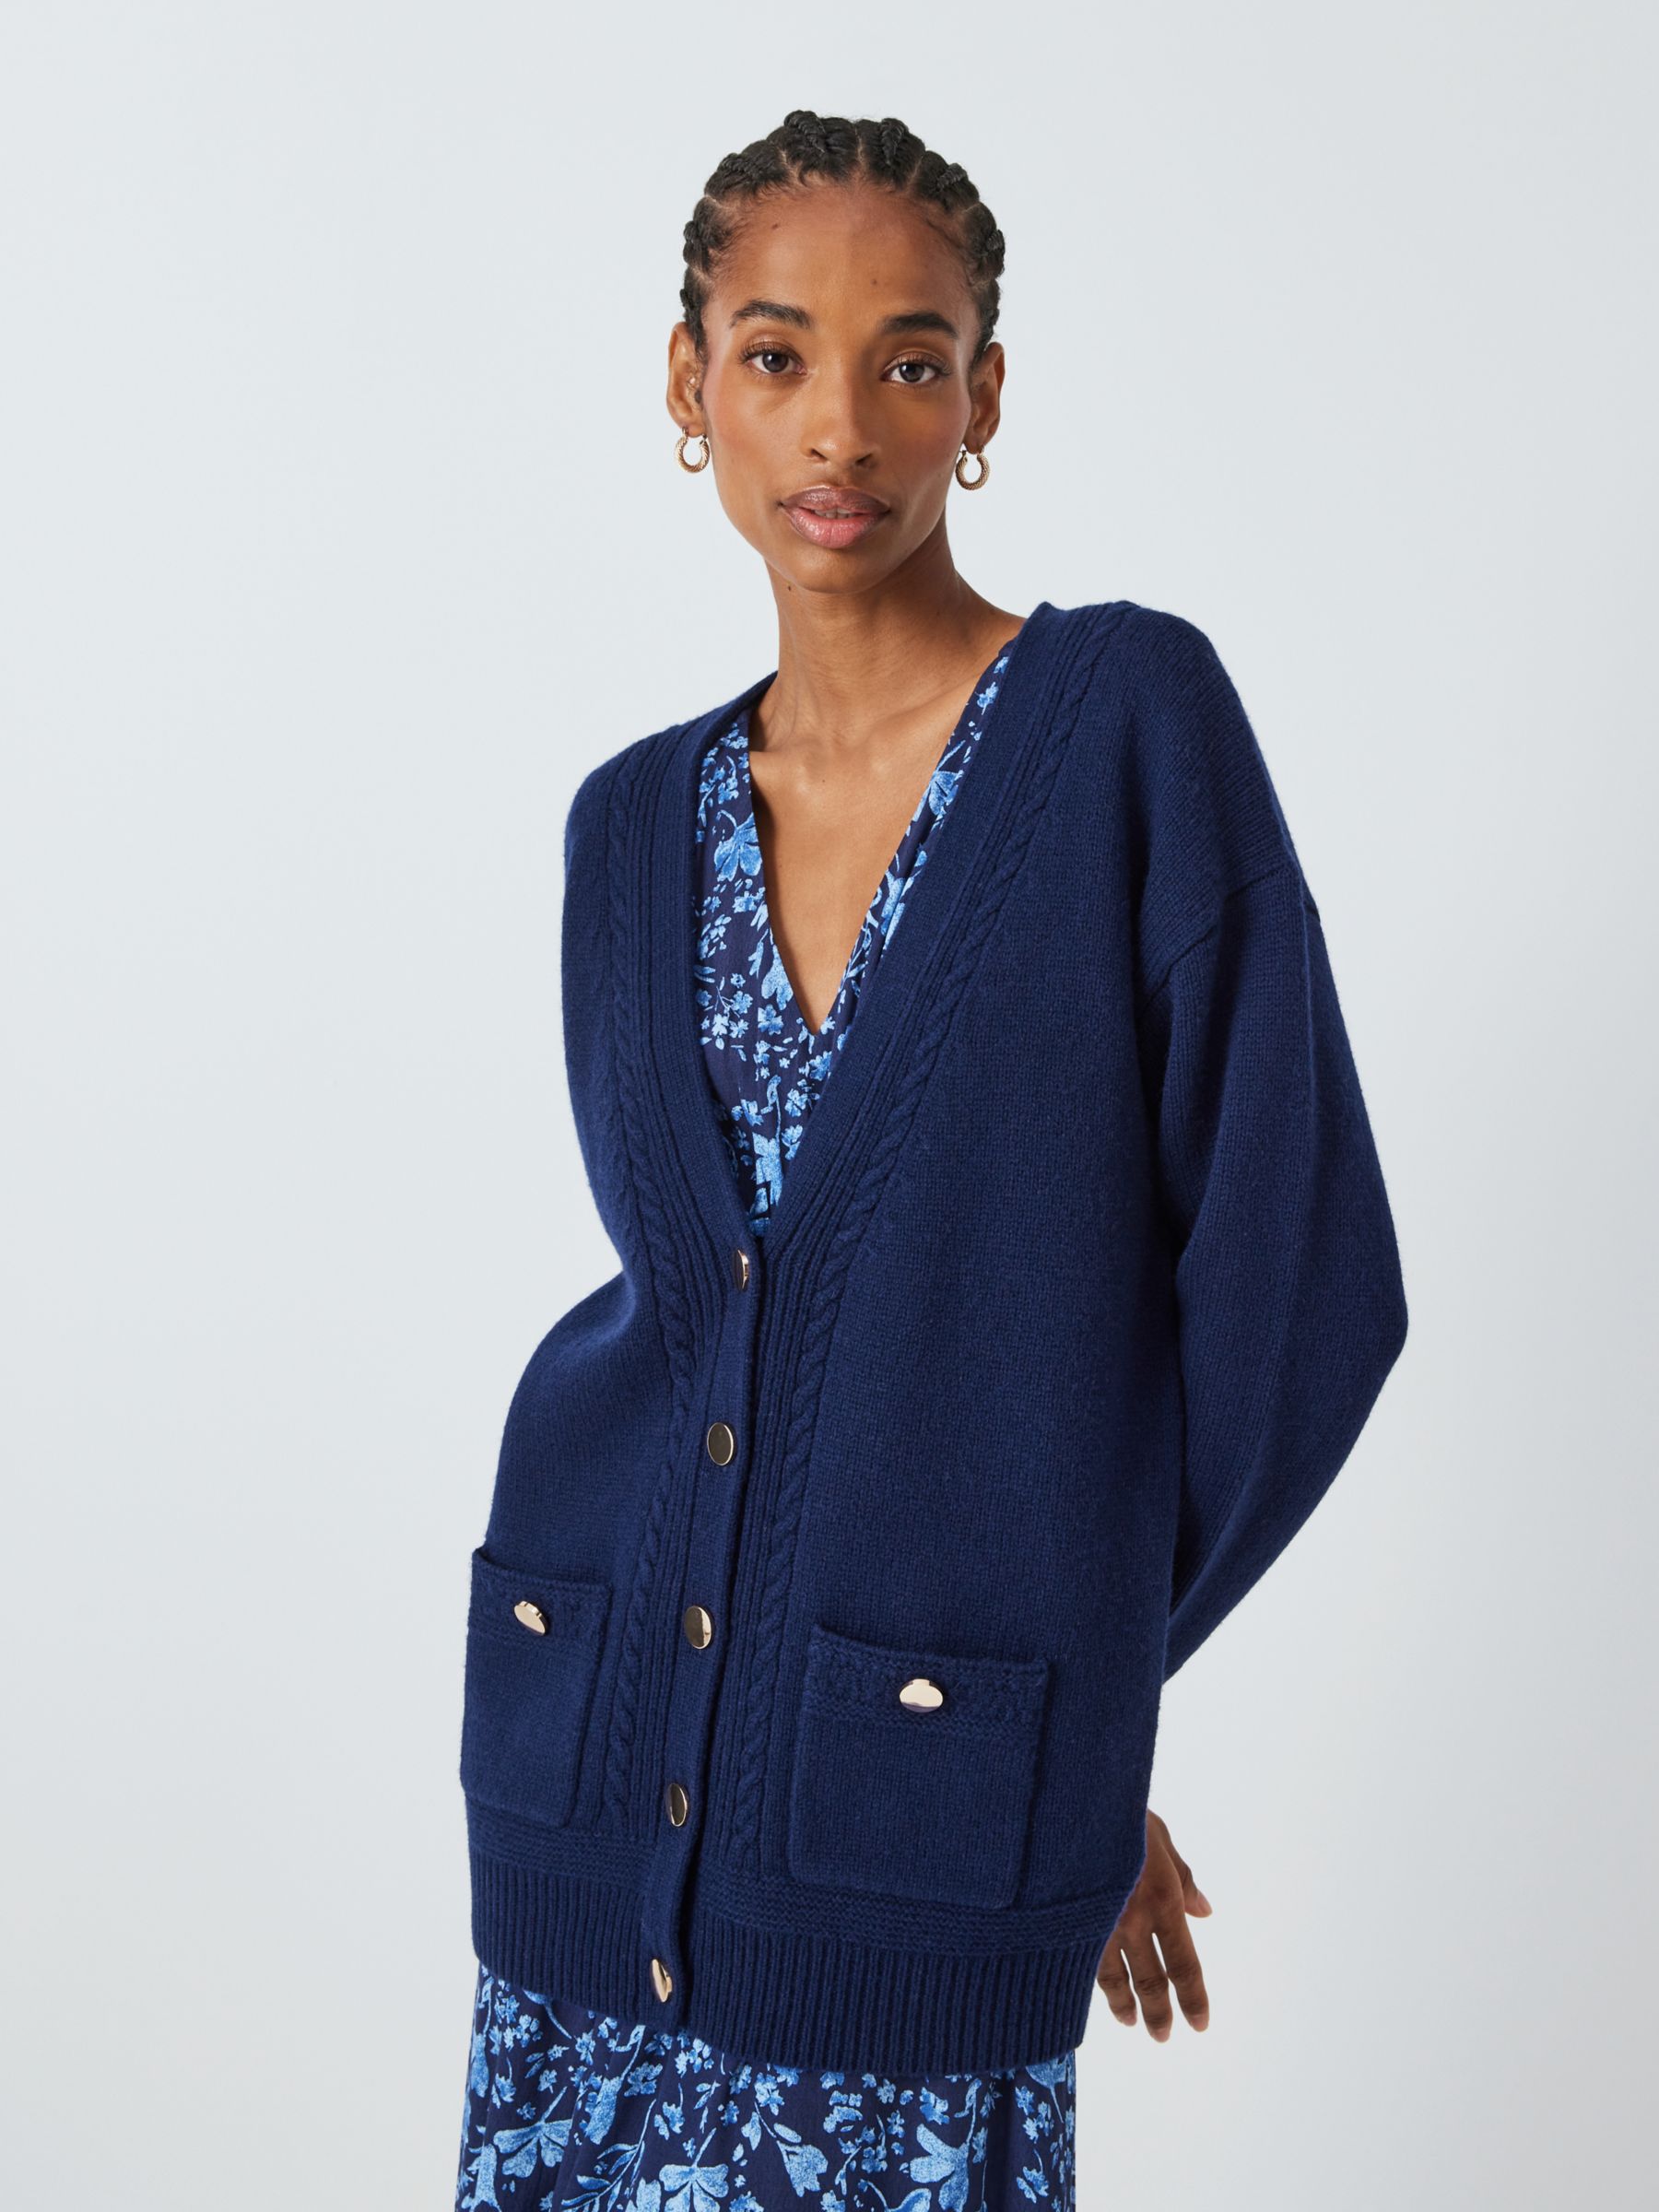 Women's Chunky Cardigans, Explore our New Arrivals